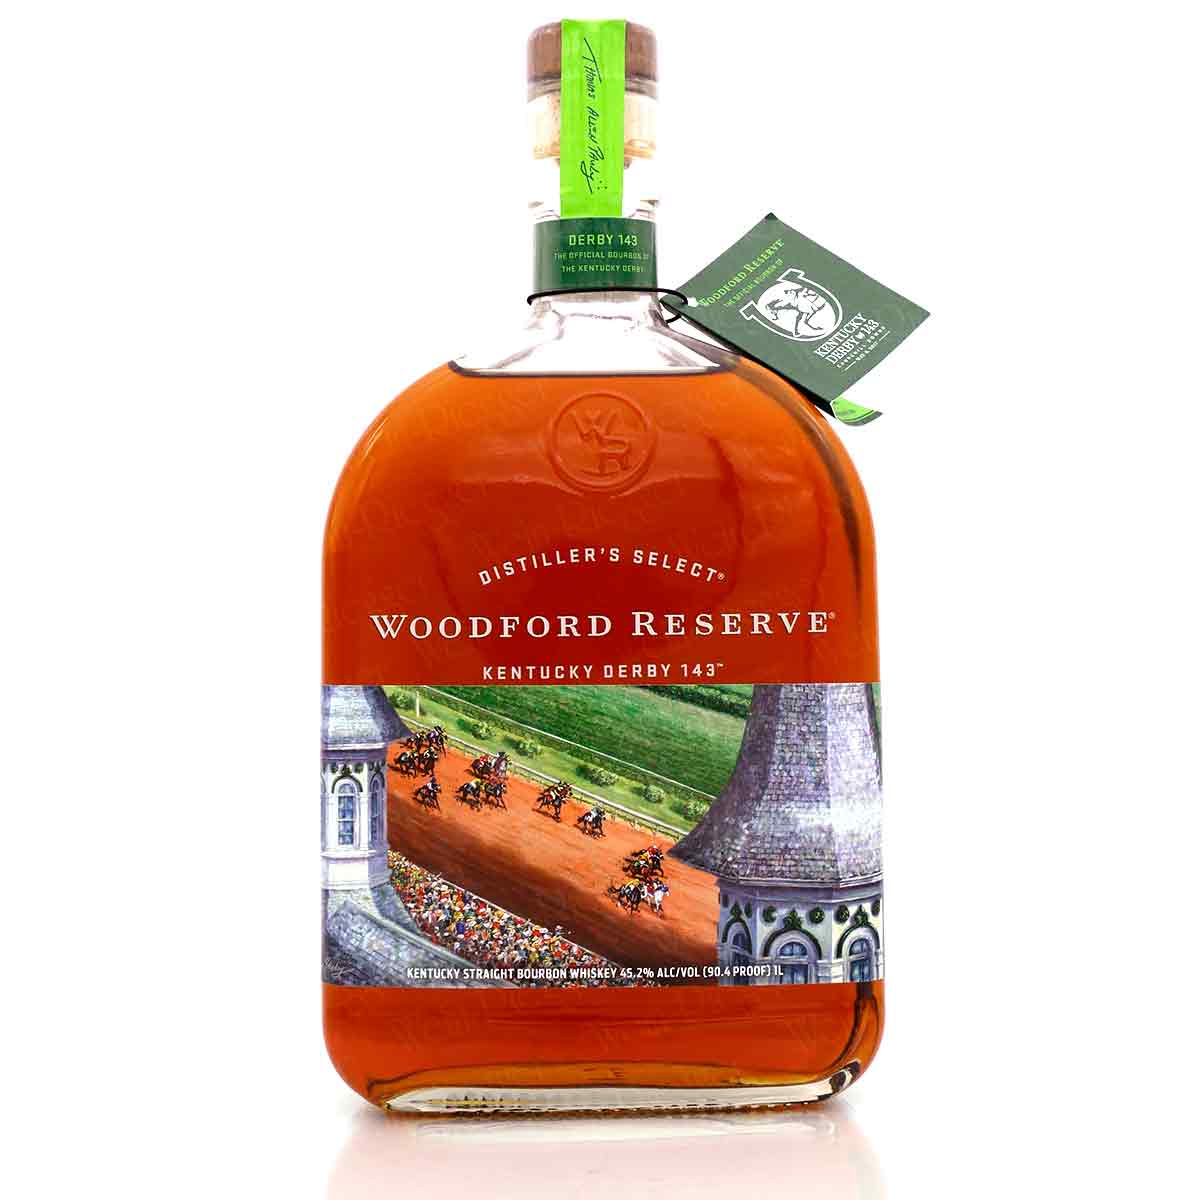 Woodford Reserve Kentucky Derby 143 2017 Straight Bourbon Whiskey